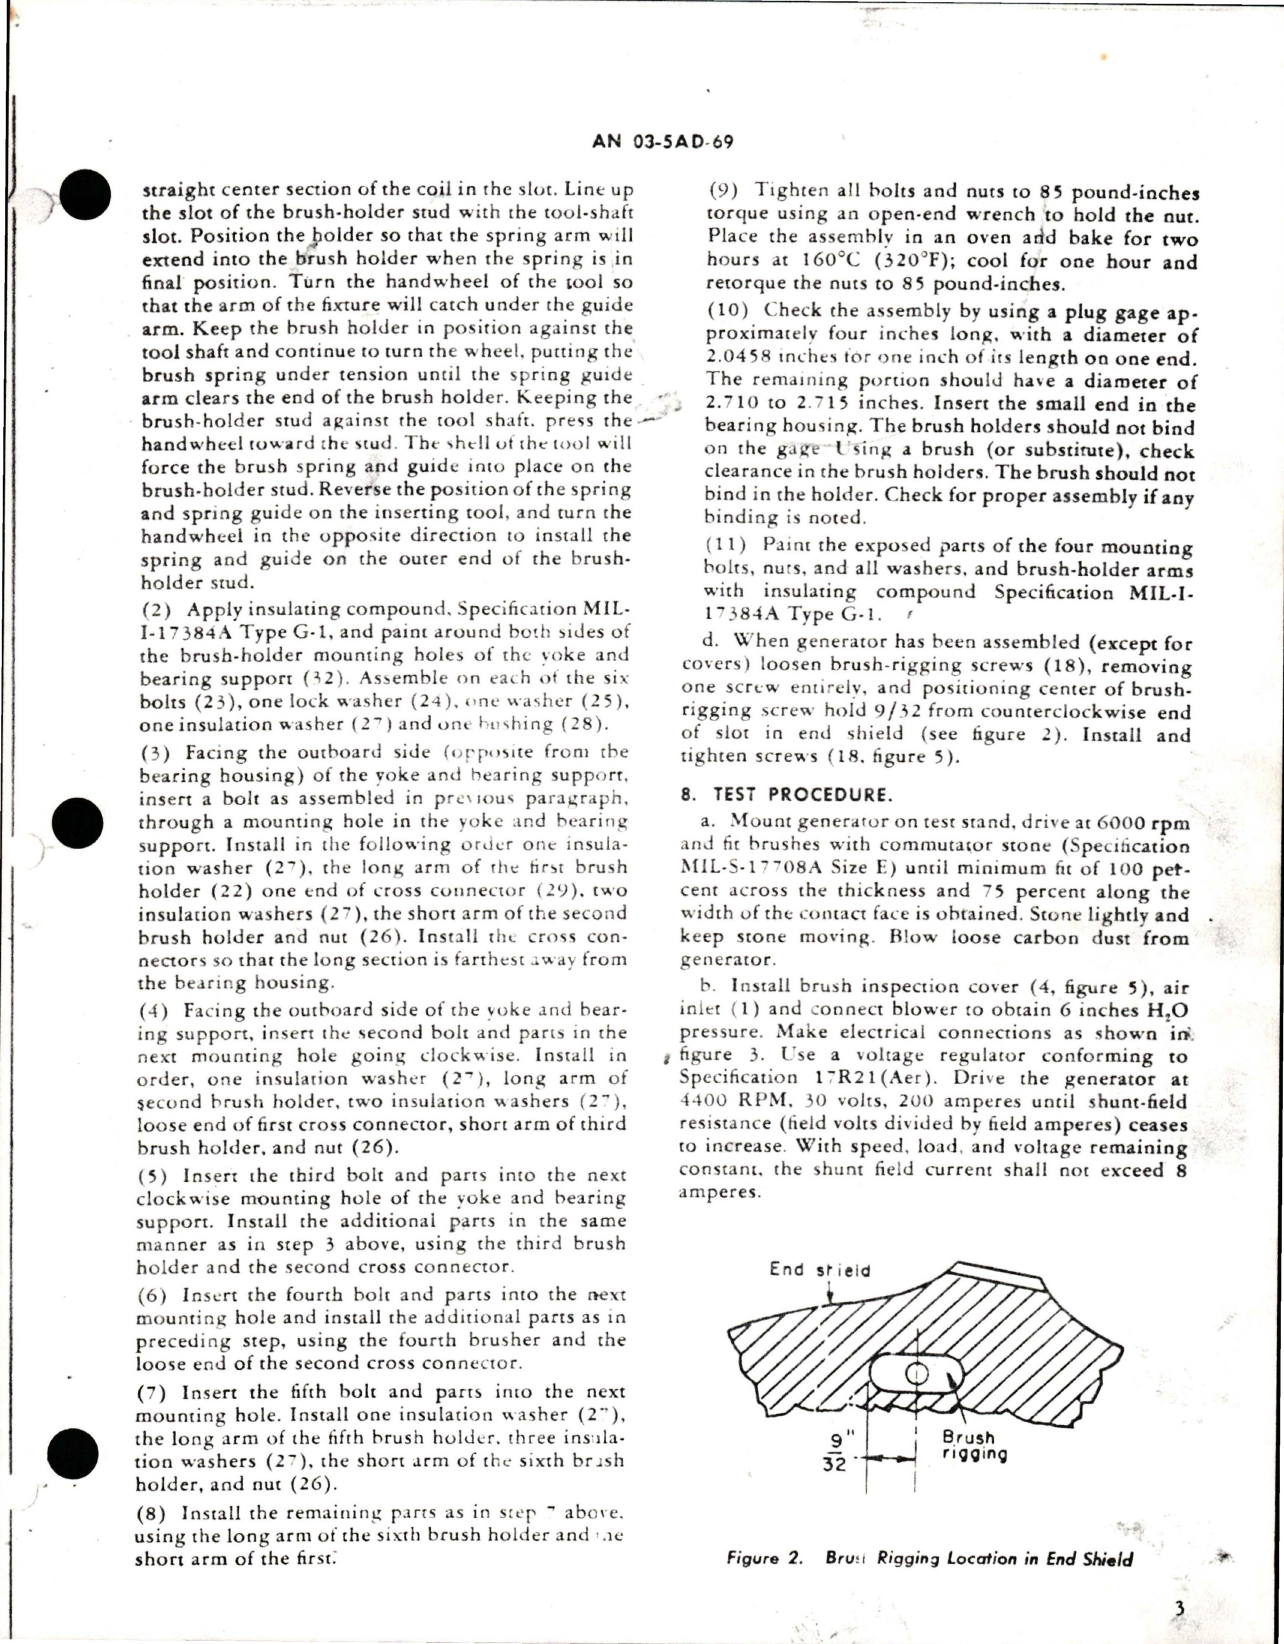 Sample page 5 from AirCorps Library document: Overhaul Instructions with Parts Breakdown for Direct Current Aircraft Generator